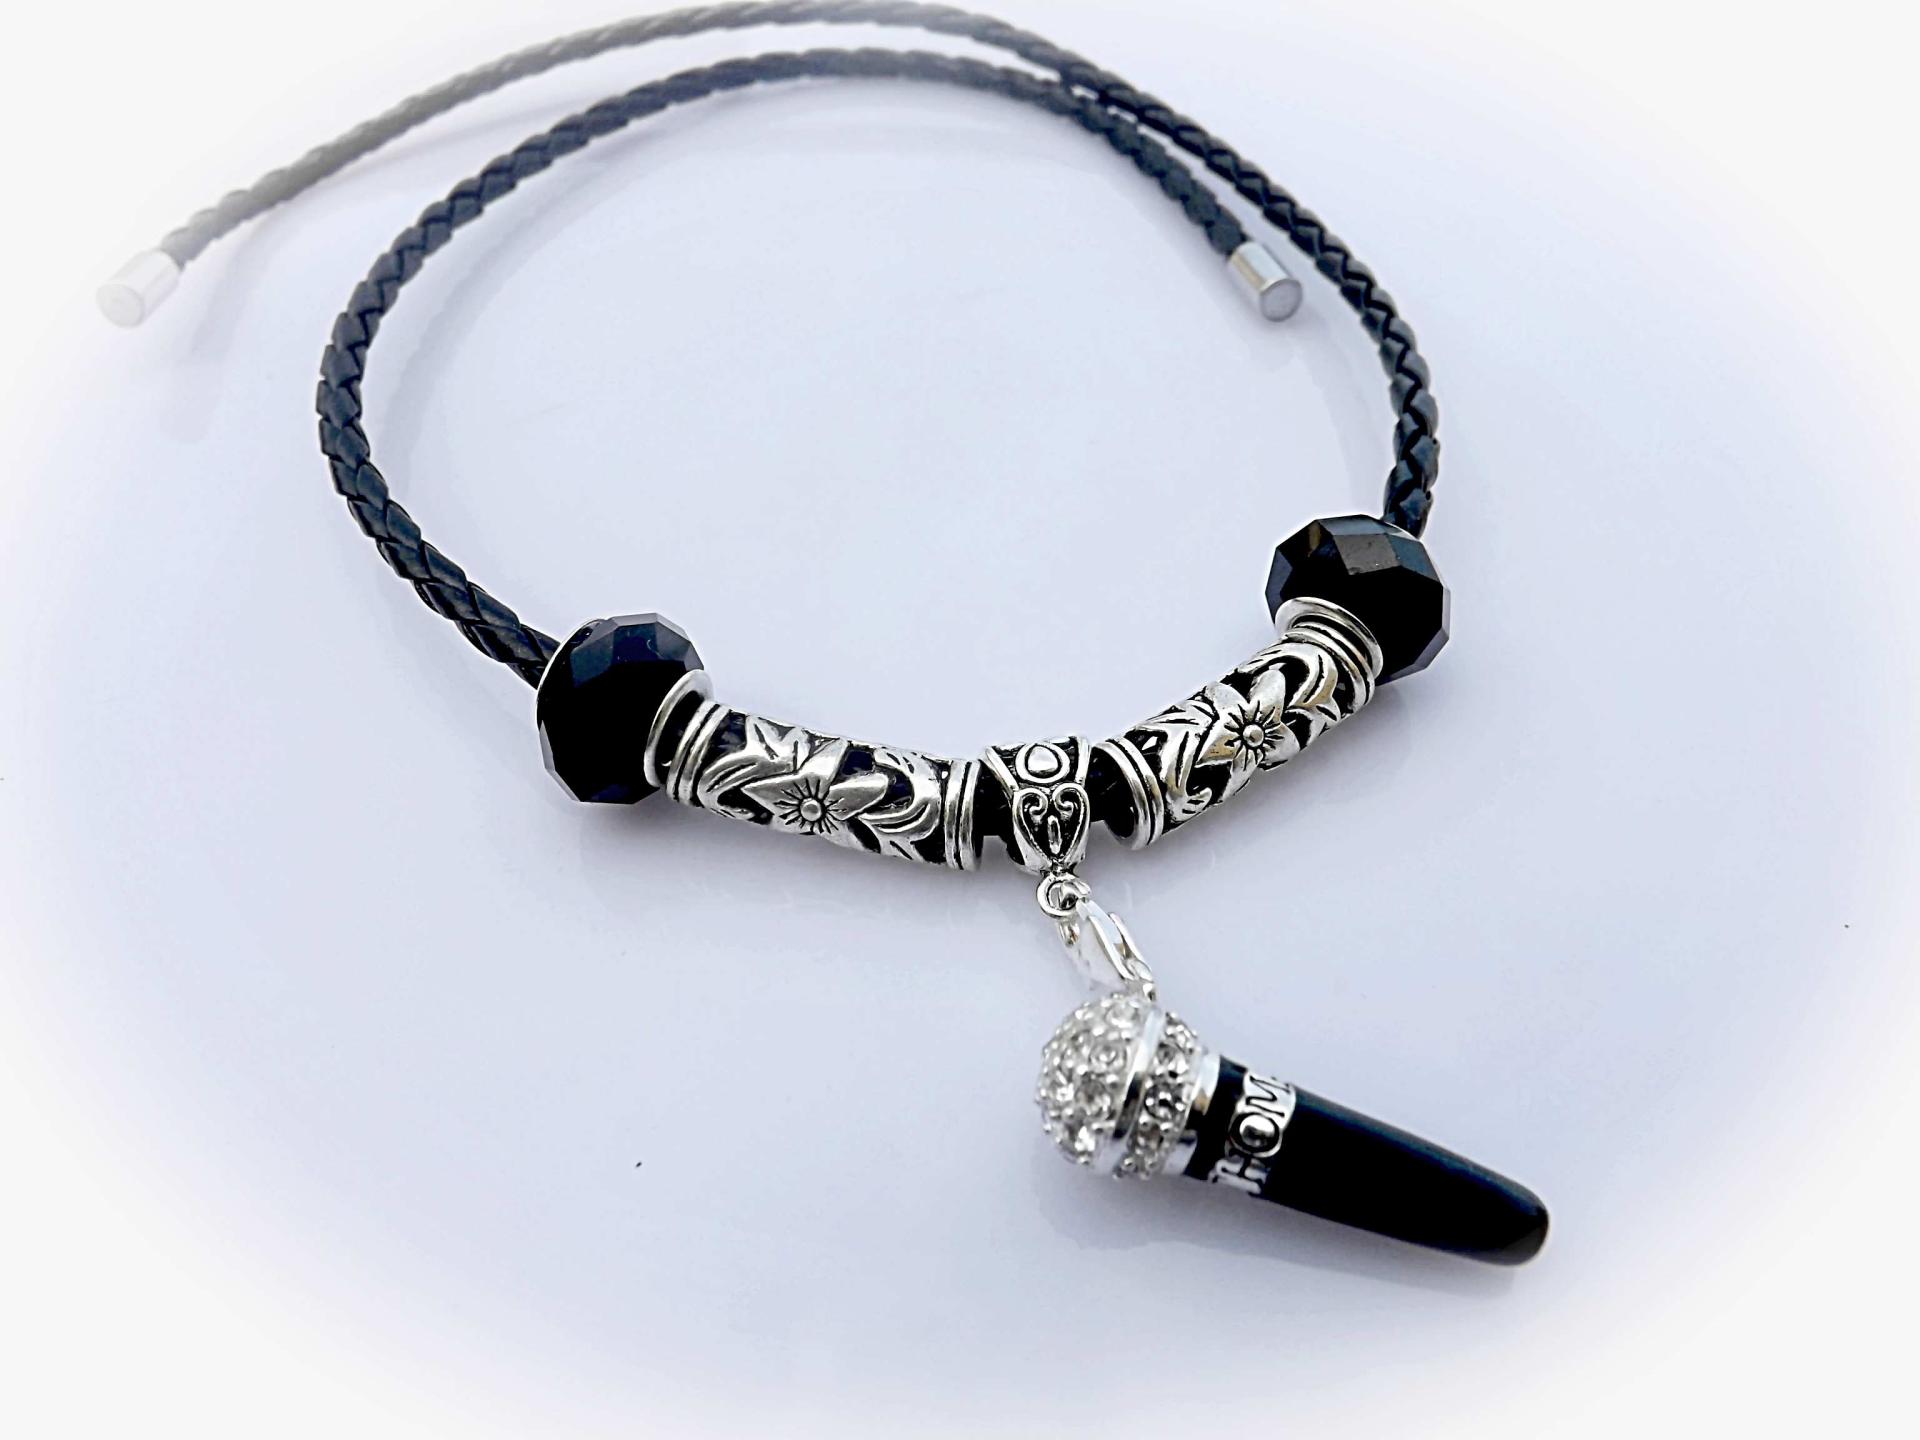 Microphone Choker Necklace "Funky & Chunky" style